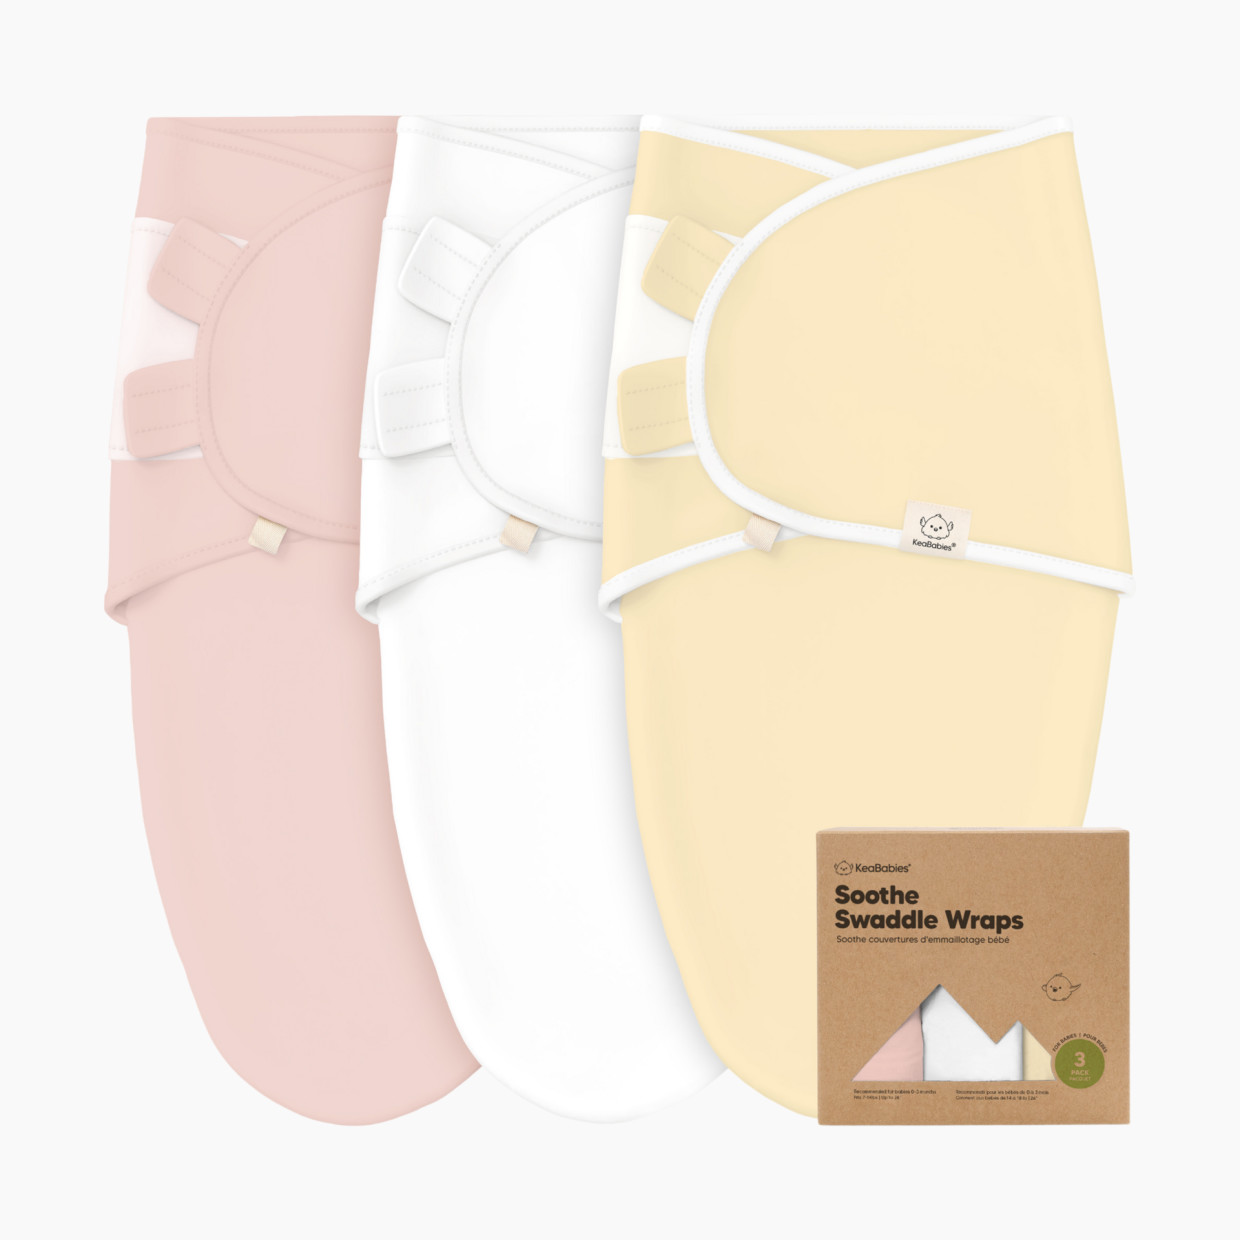 KeaBabies Soothe Swaddle Wraps (3 Pack) - Daffodil, One Size, 3.